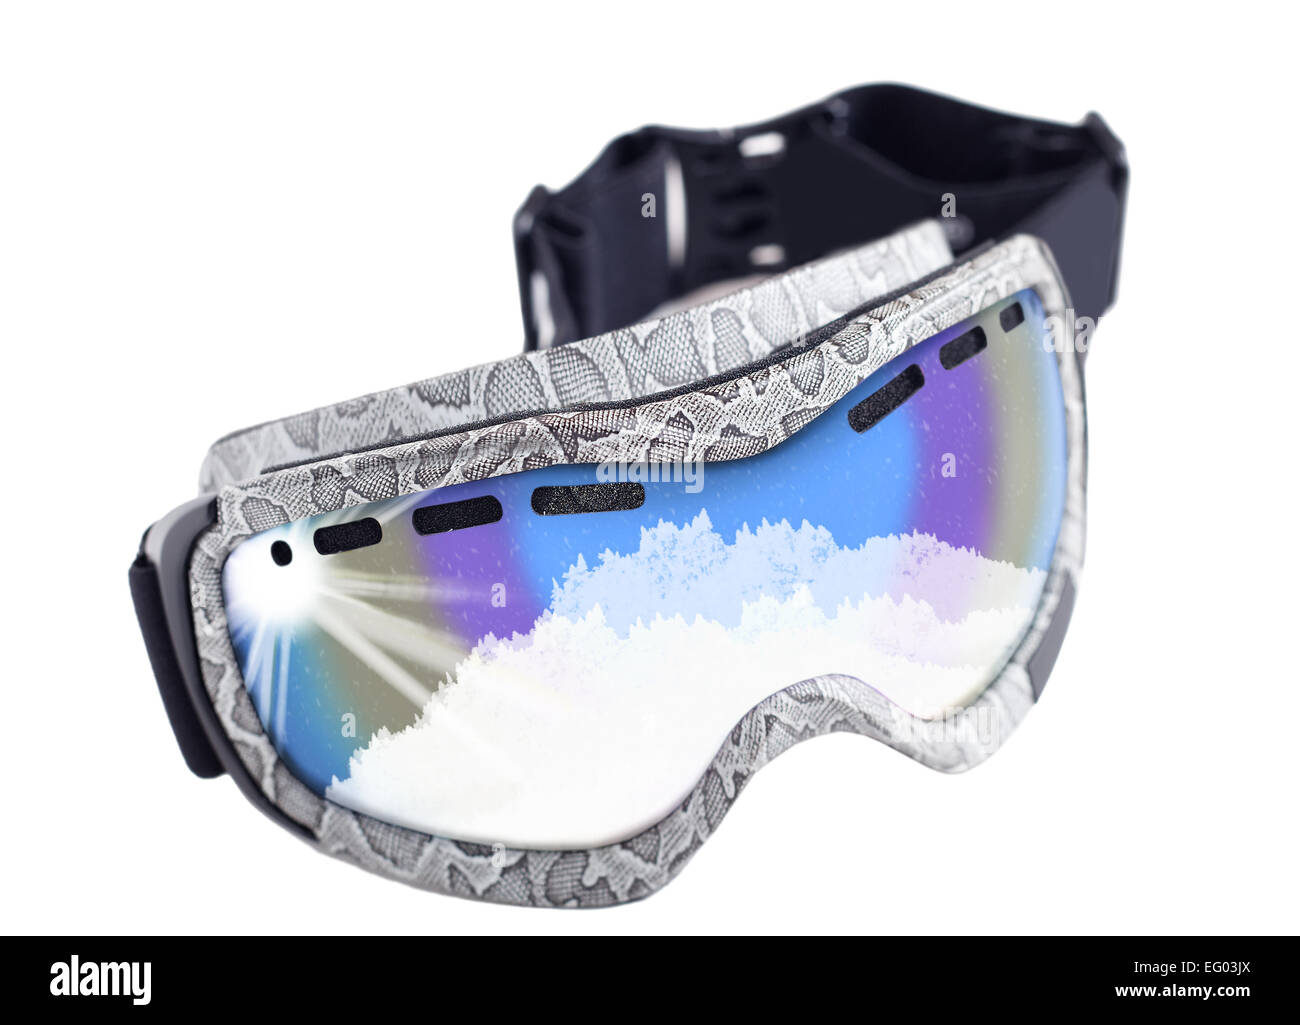 goggles for snowboarding on an isolated background Stock Photo